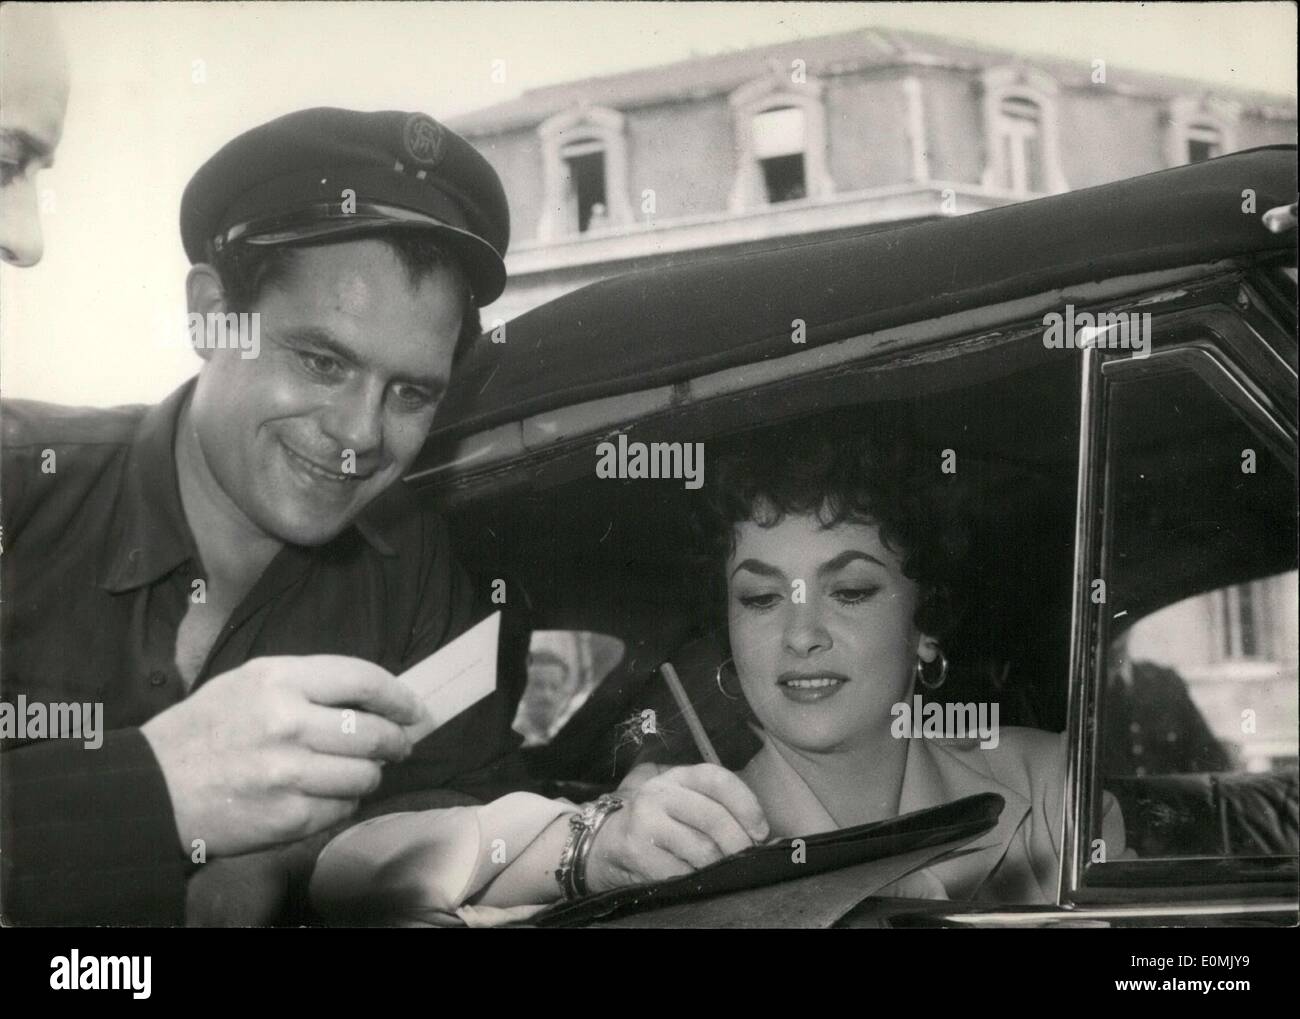 Jun. 21, 1955 - Lollobrigida arrived this morning in Gare de Lyon. She will be filming her next movie in France with Anne Vernon. Stock Photo